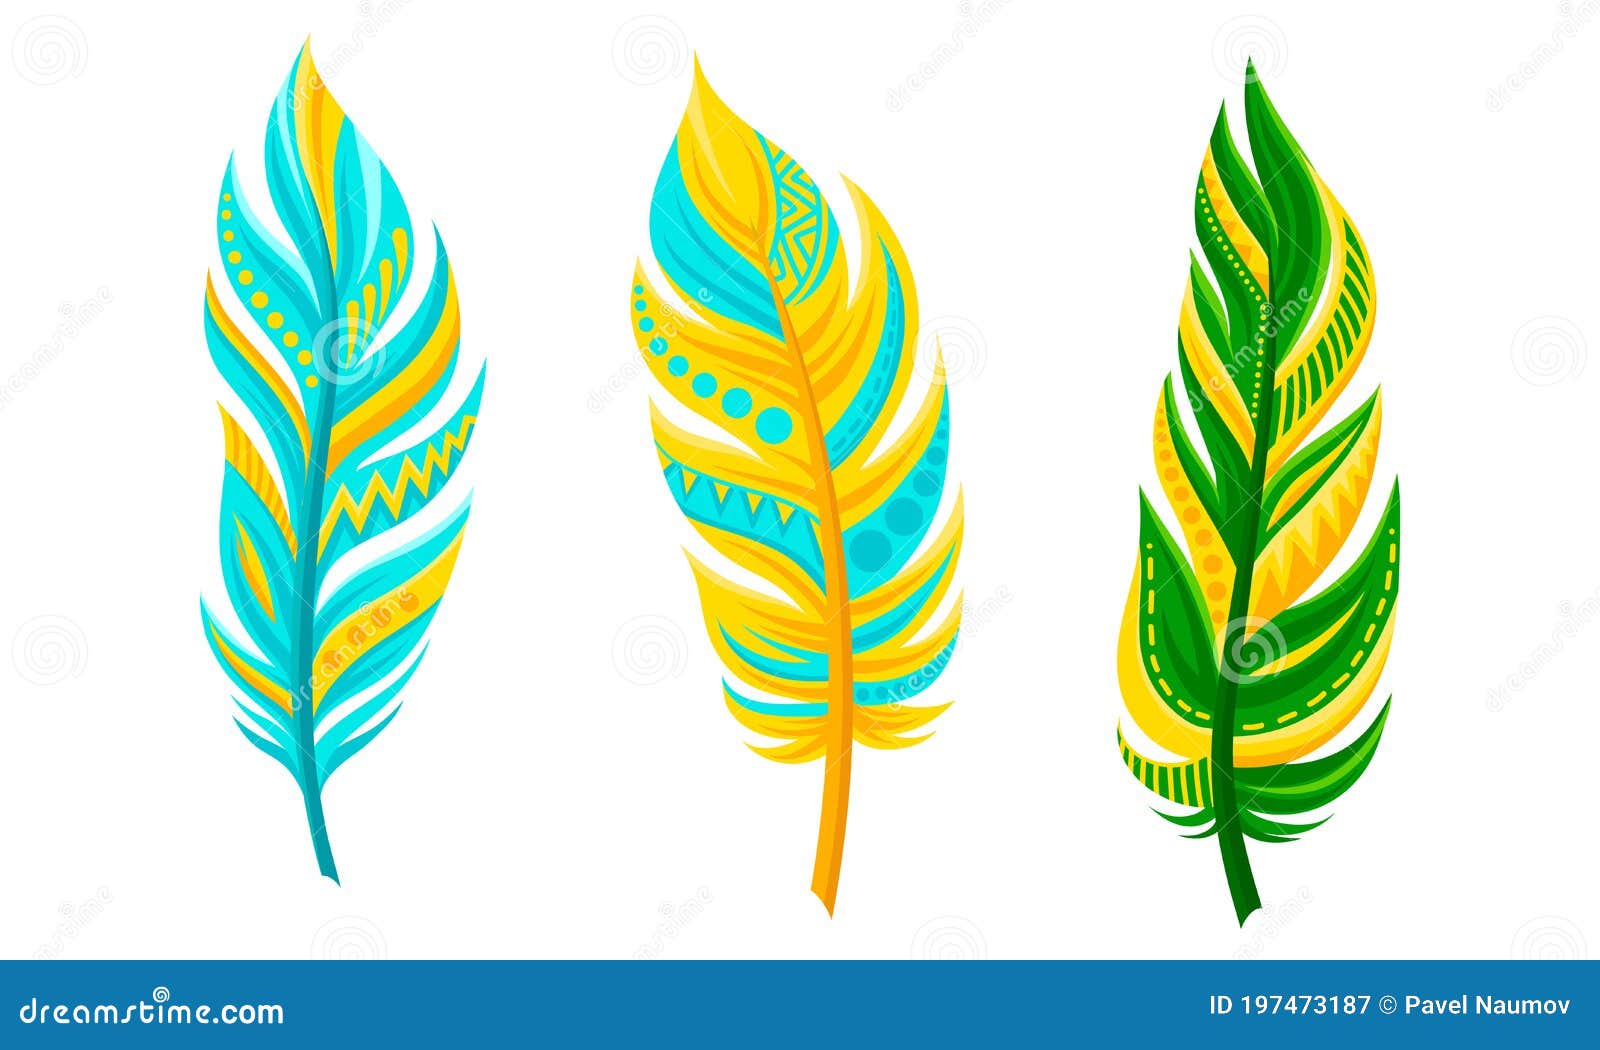 Decorative Curved Feathers As Avian Plumage Vector Set Stock Vector ...